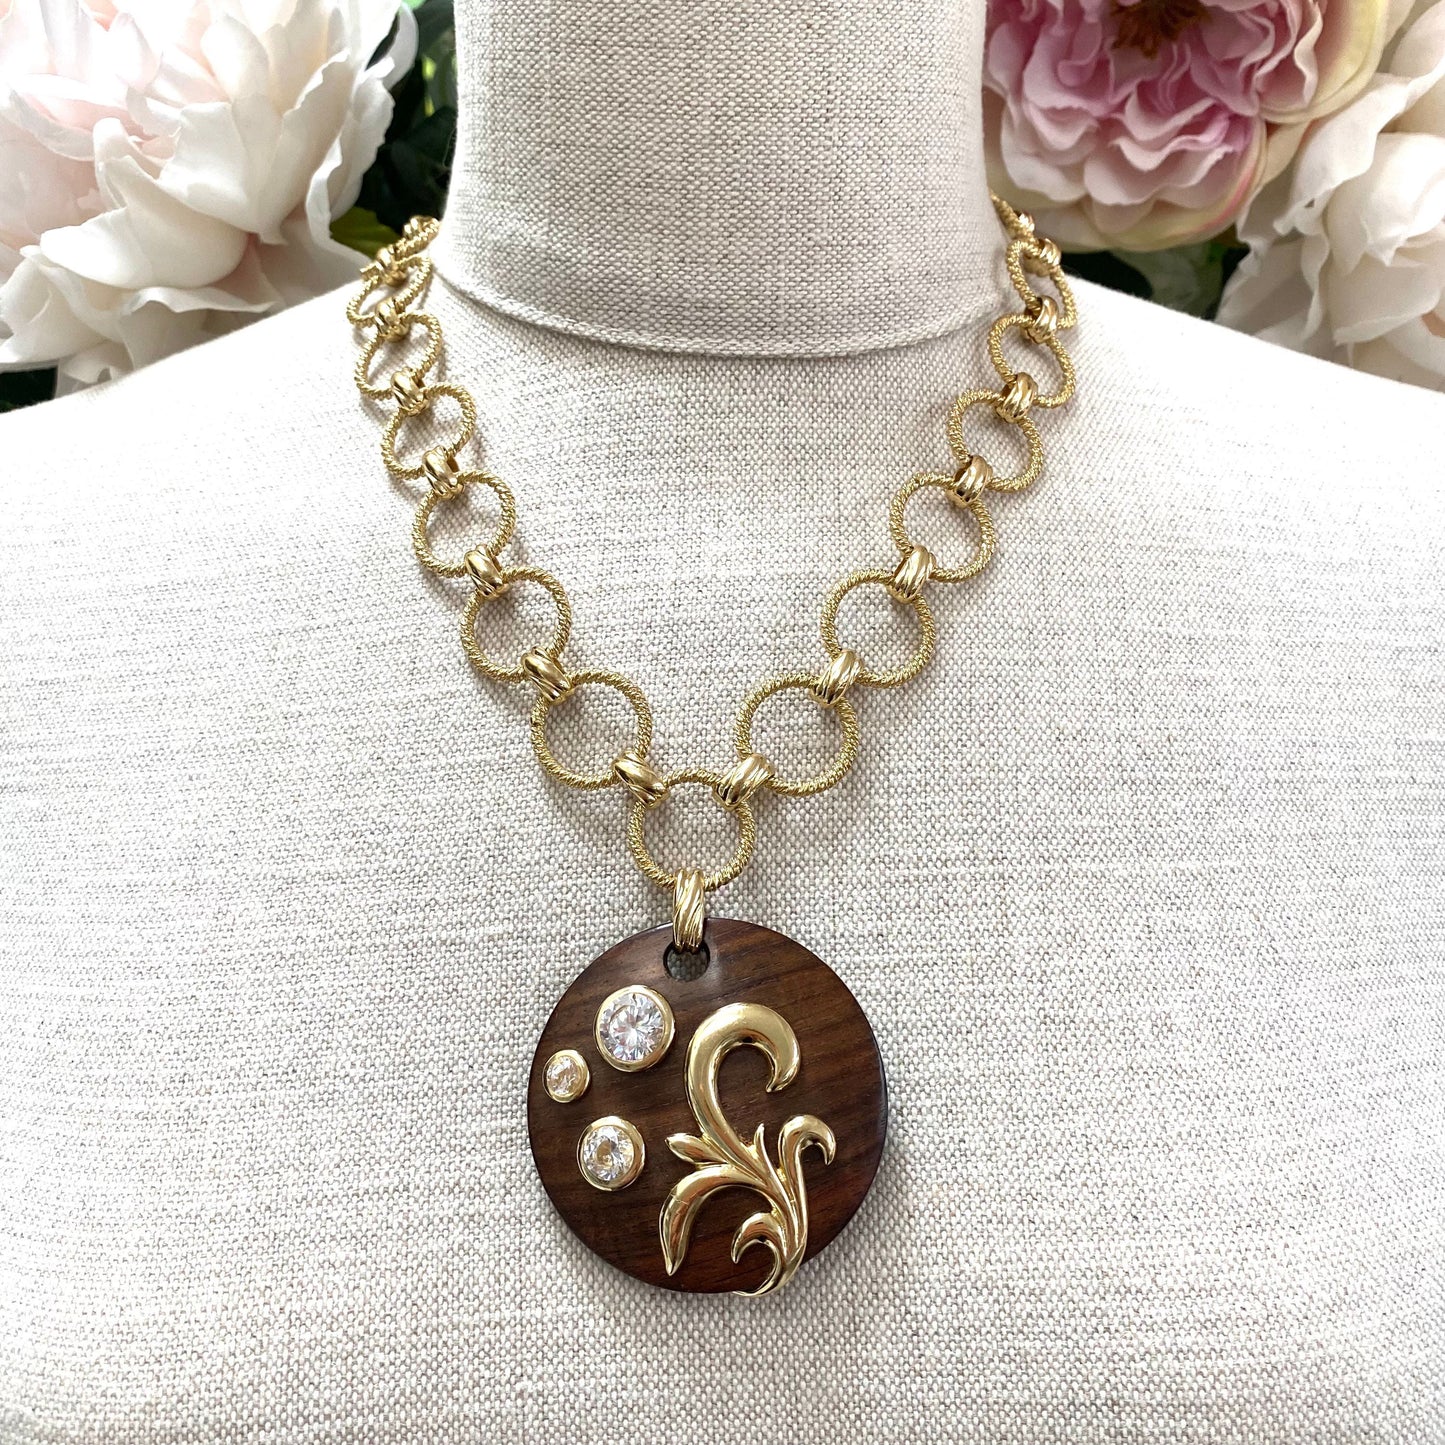 Dominique Aurientis Gold Plated Necklace with Round Wood Pendant